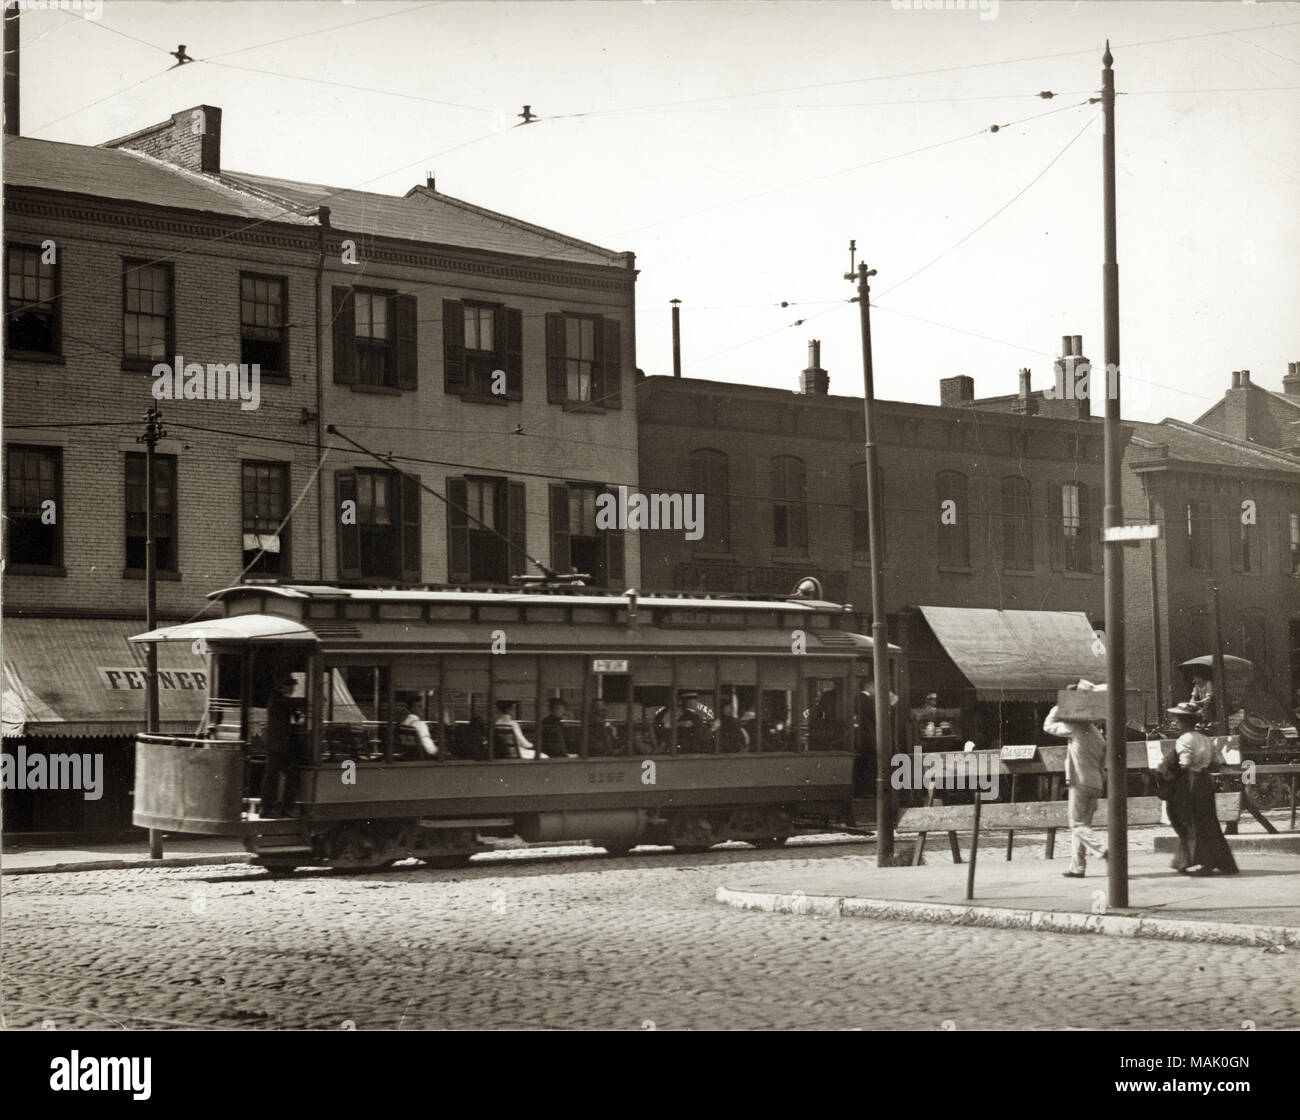 Horizontal, black and white photograph of a trolley filled with passengers moving down a brick paved road. Title: Streetcar at South Tenth and Market Streets.  . circa 1915. Stock Photo